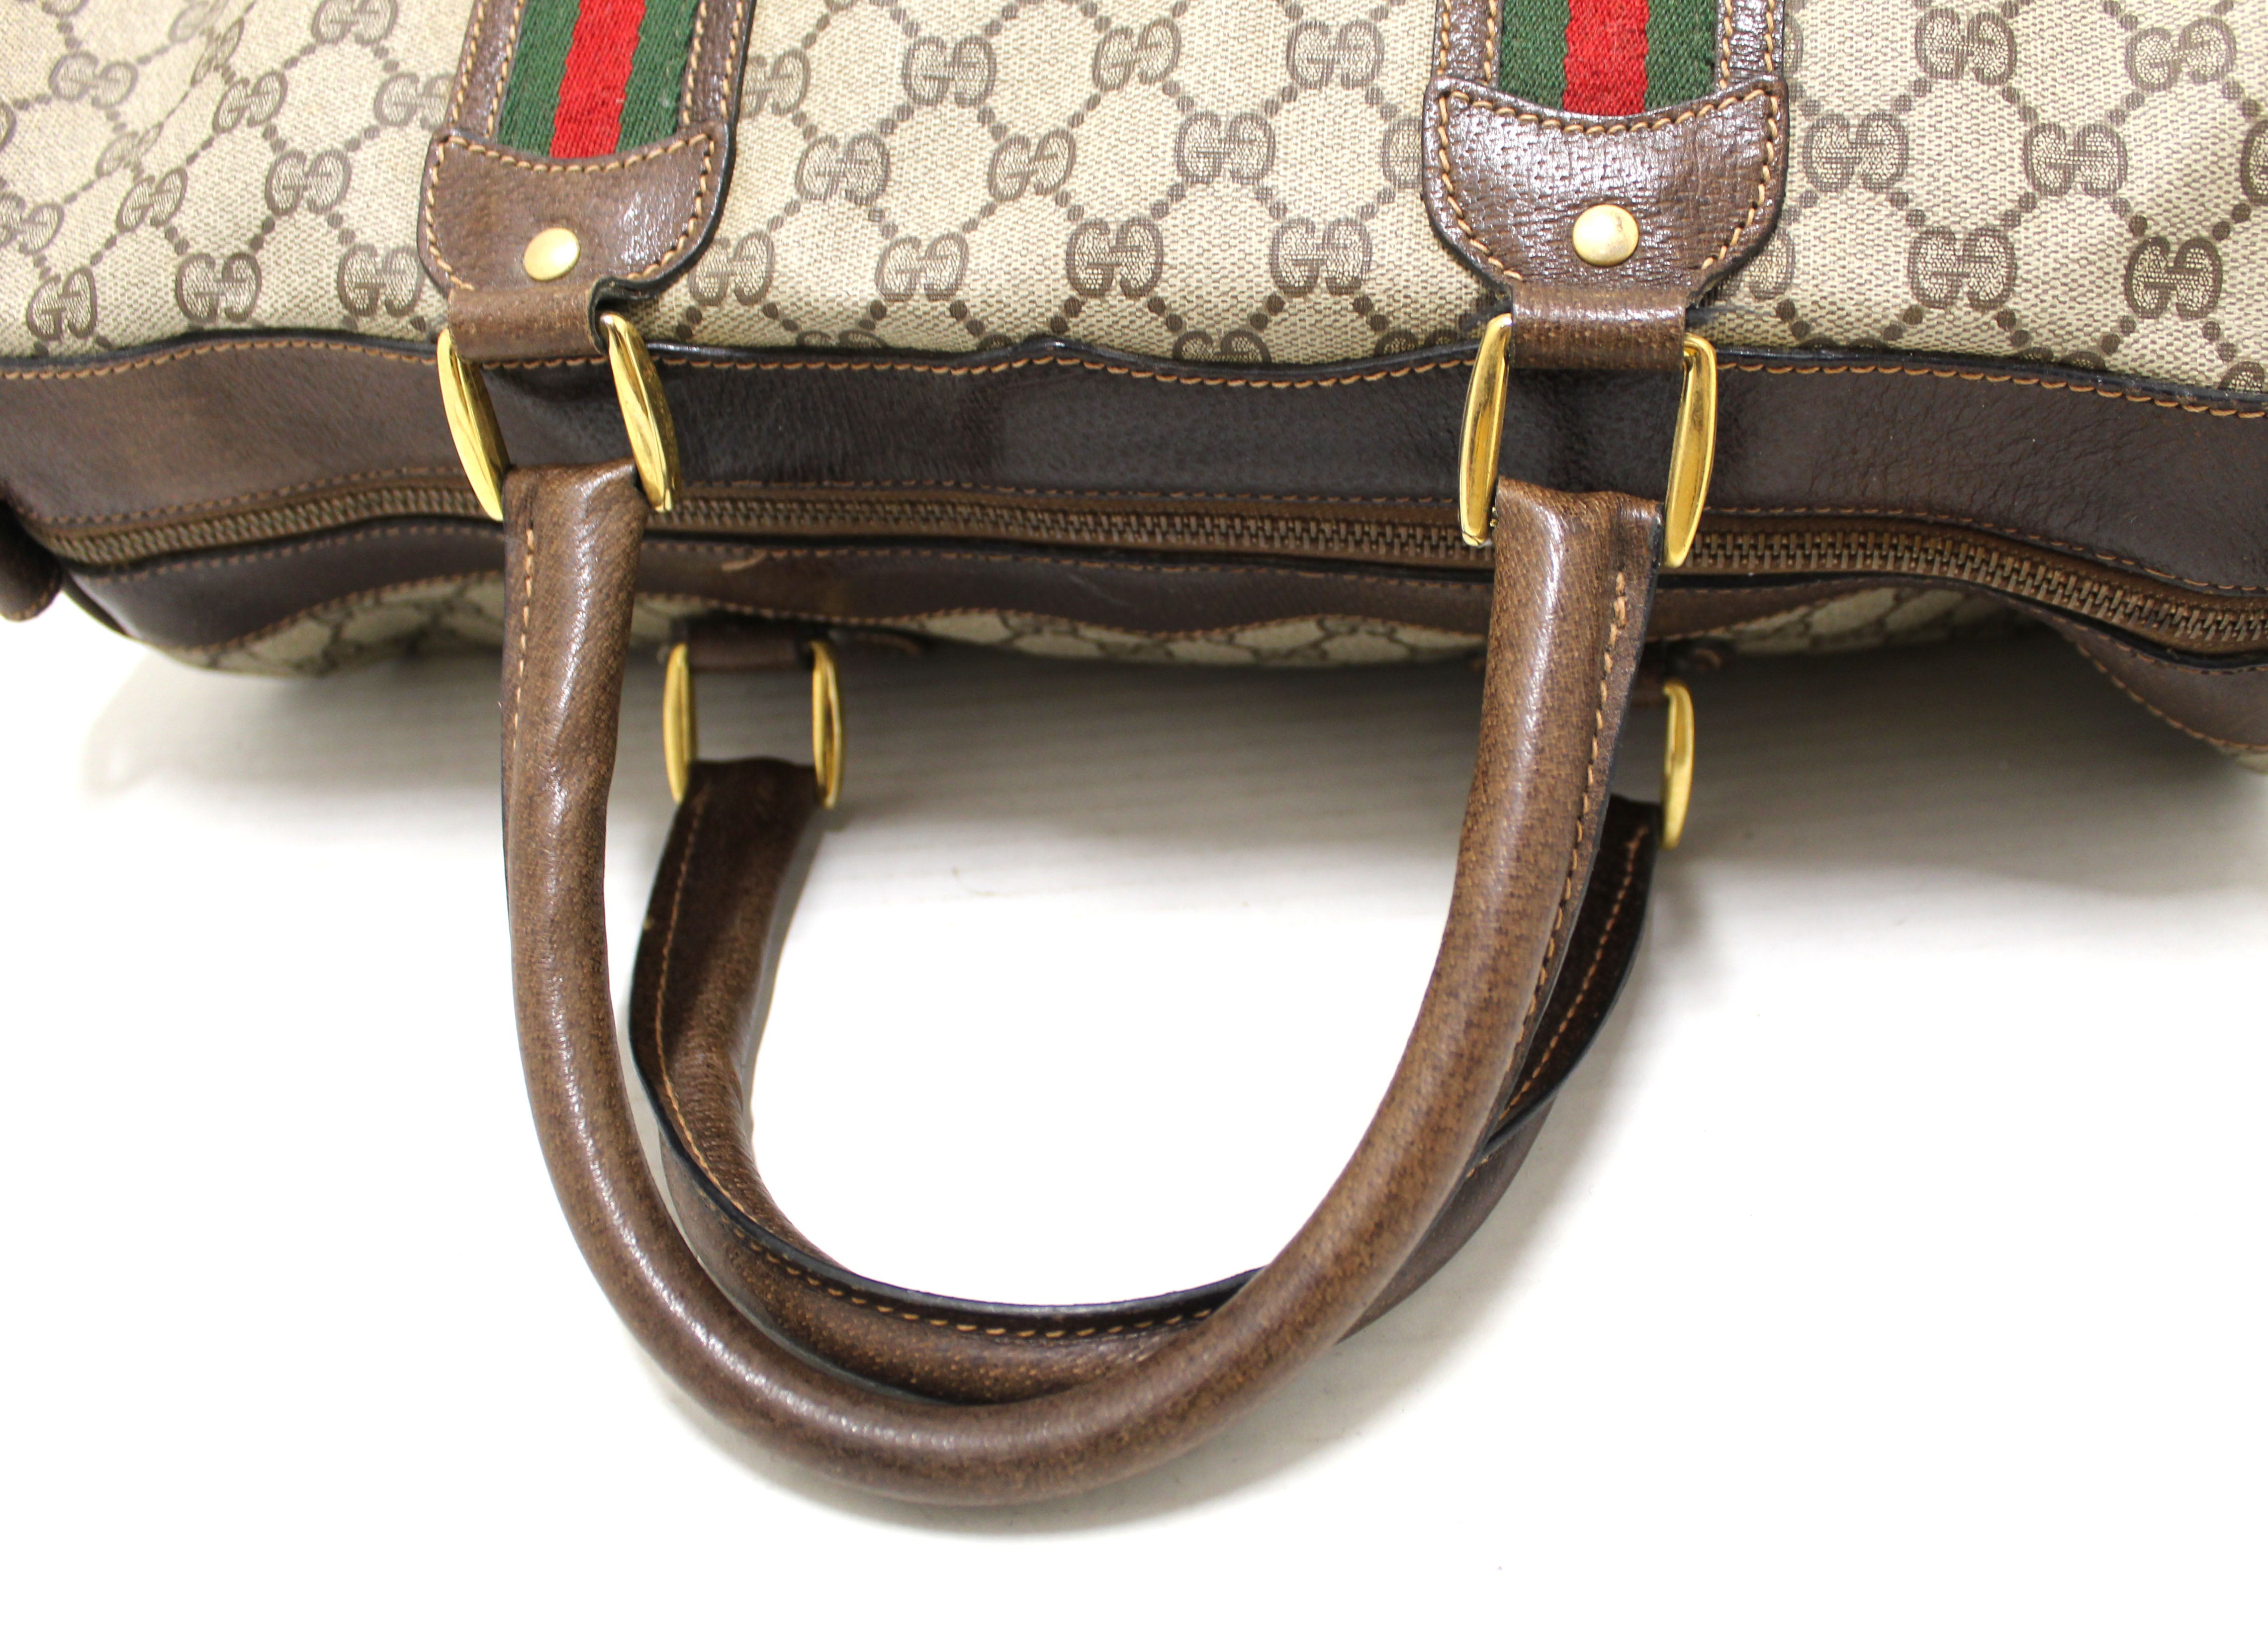 Authentic Gucci Vintage GG Supreme Duffle Travel Carry On Bag